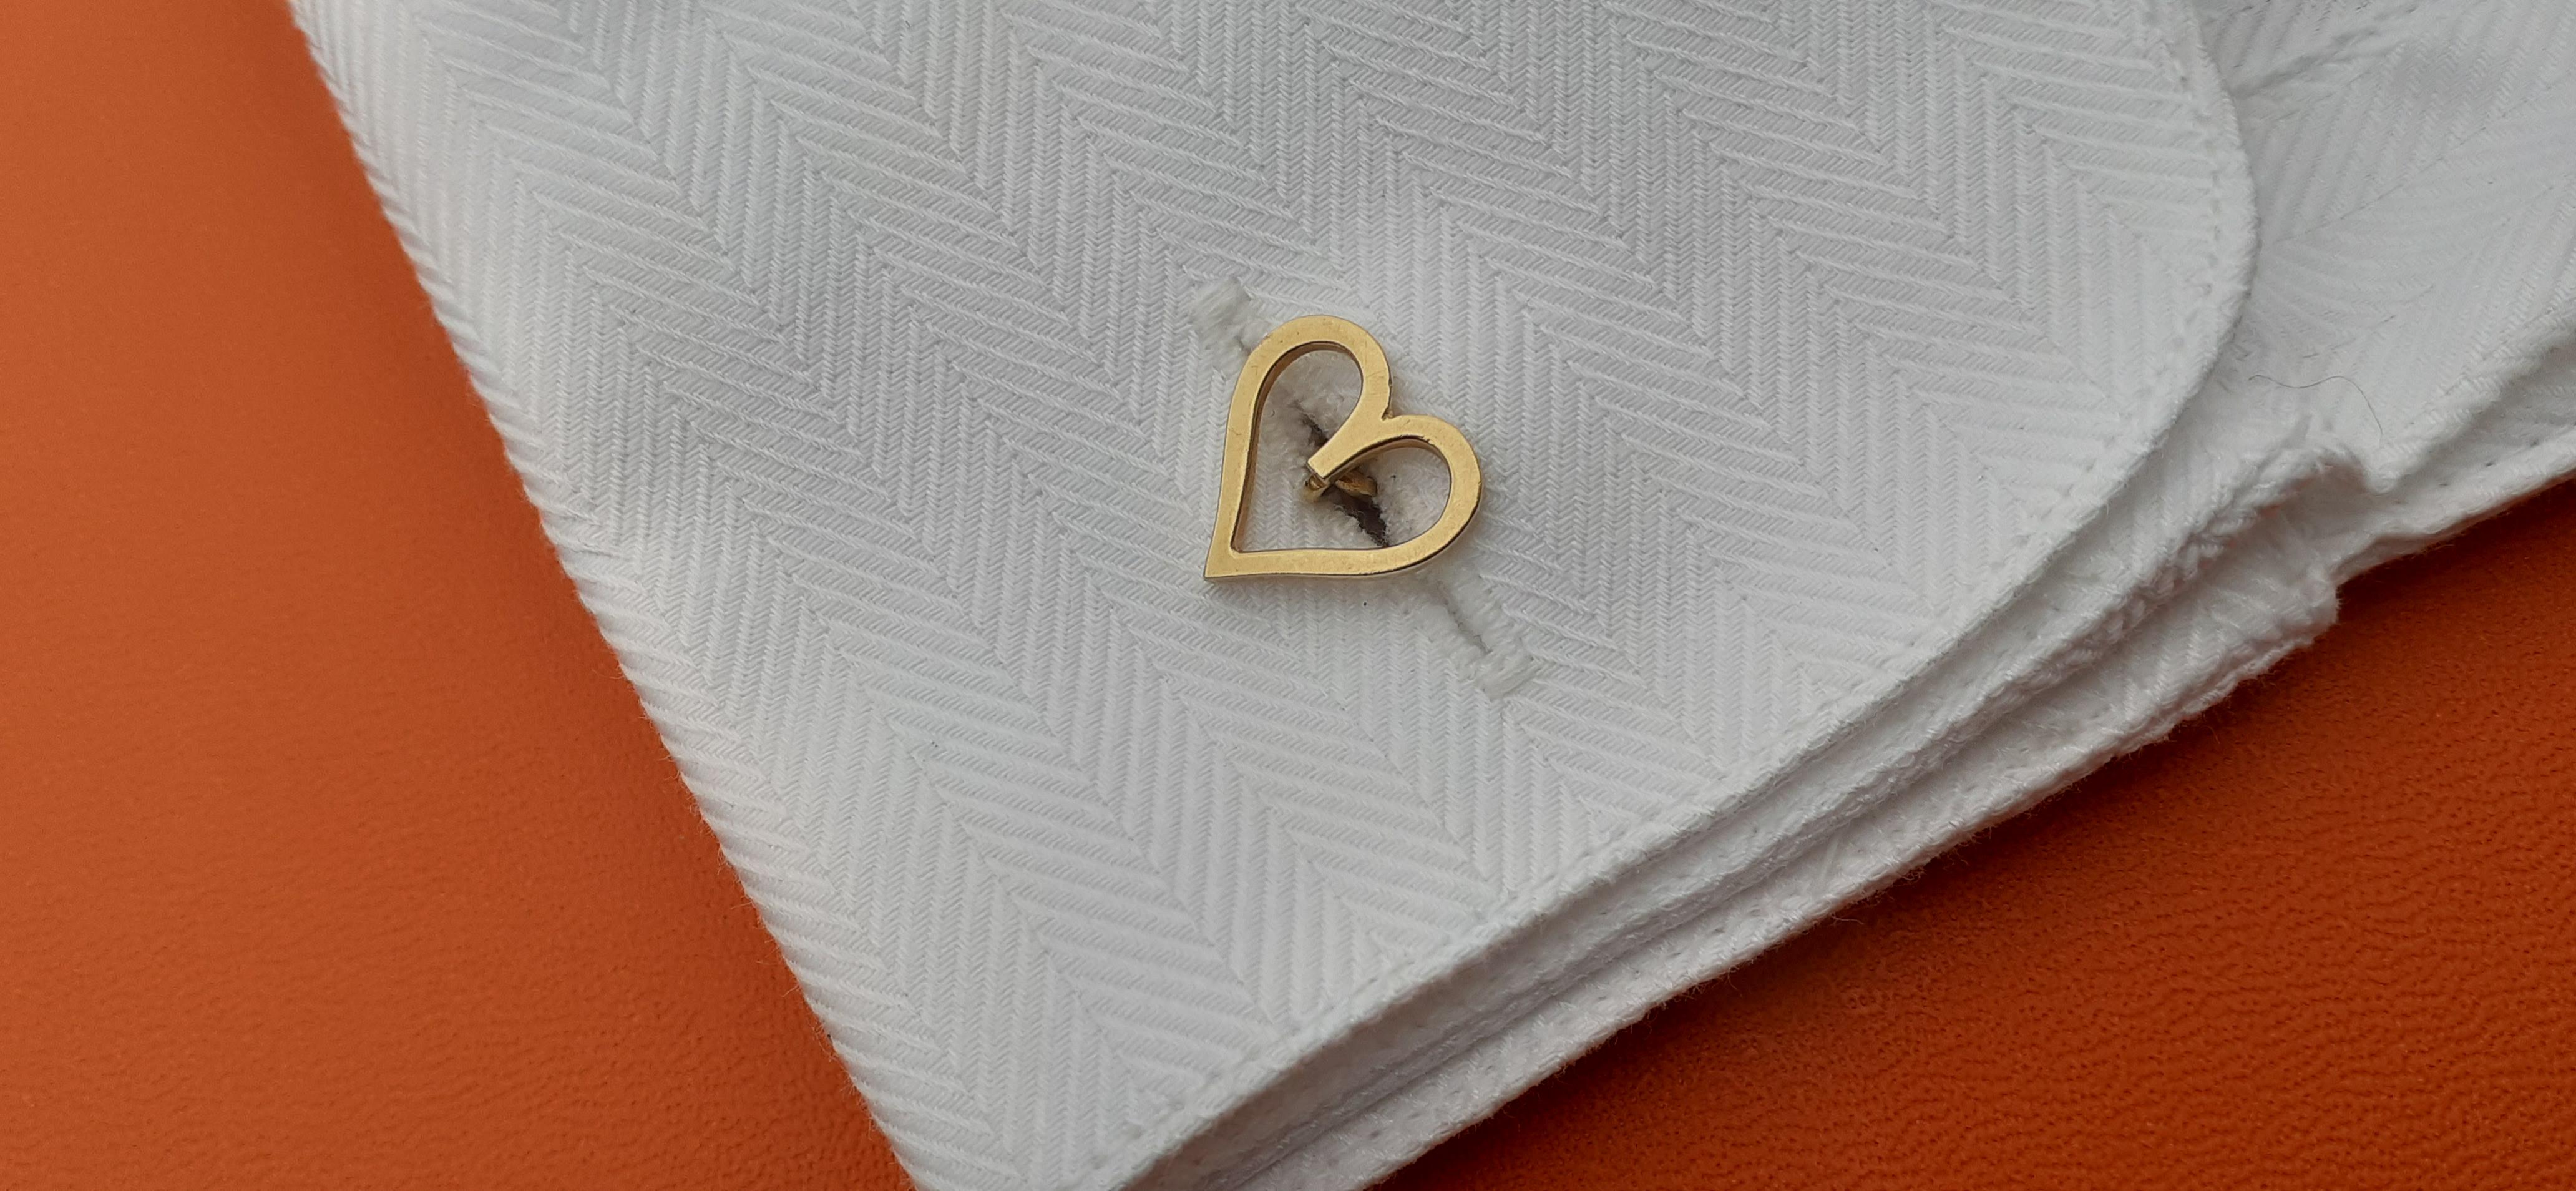 Exceptional Hermès Heart Shaped Cufflinks in Yellow Gold For Sale 6